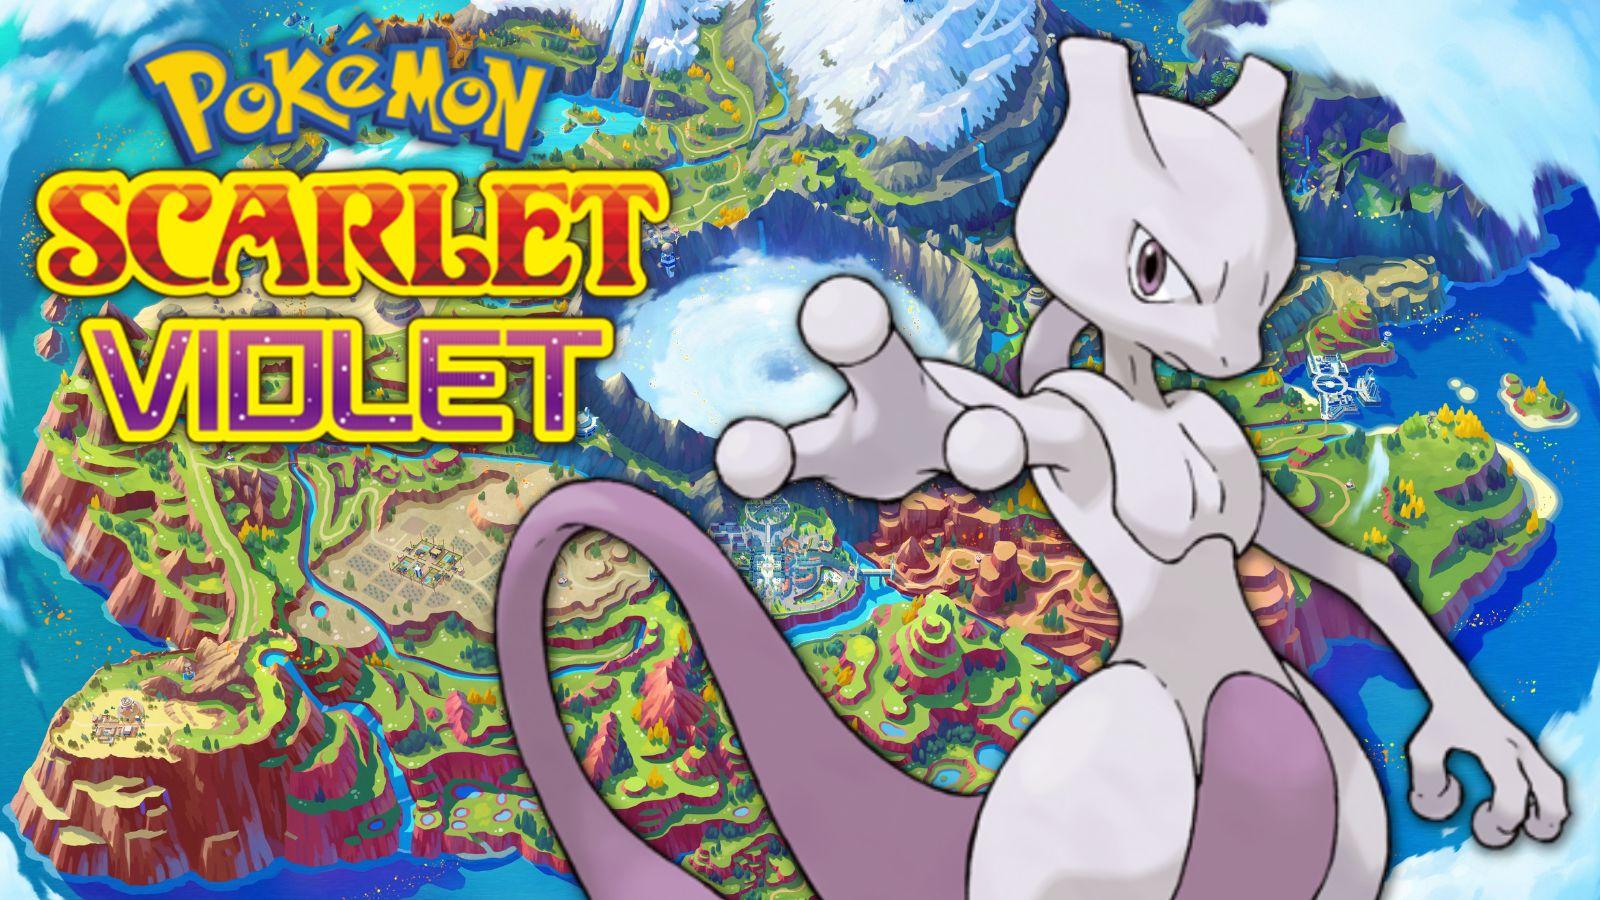 Mewtwo in Pokémon Scarlet & Violet: How to face and capture it - Meristation